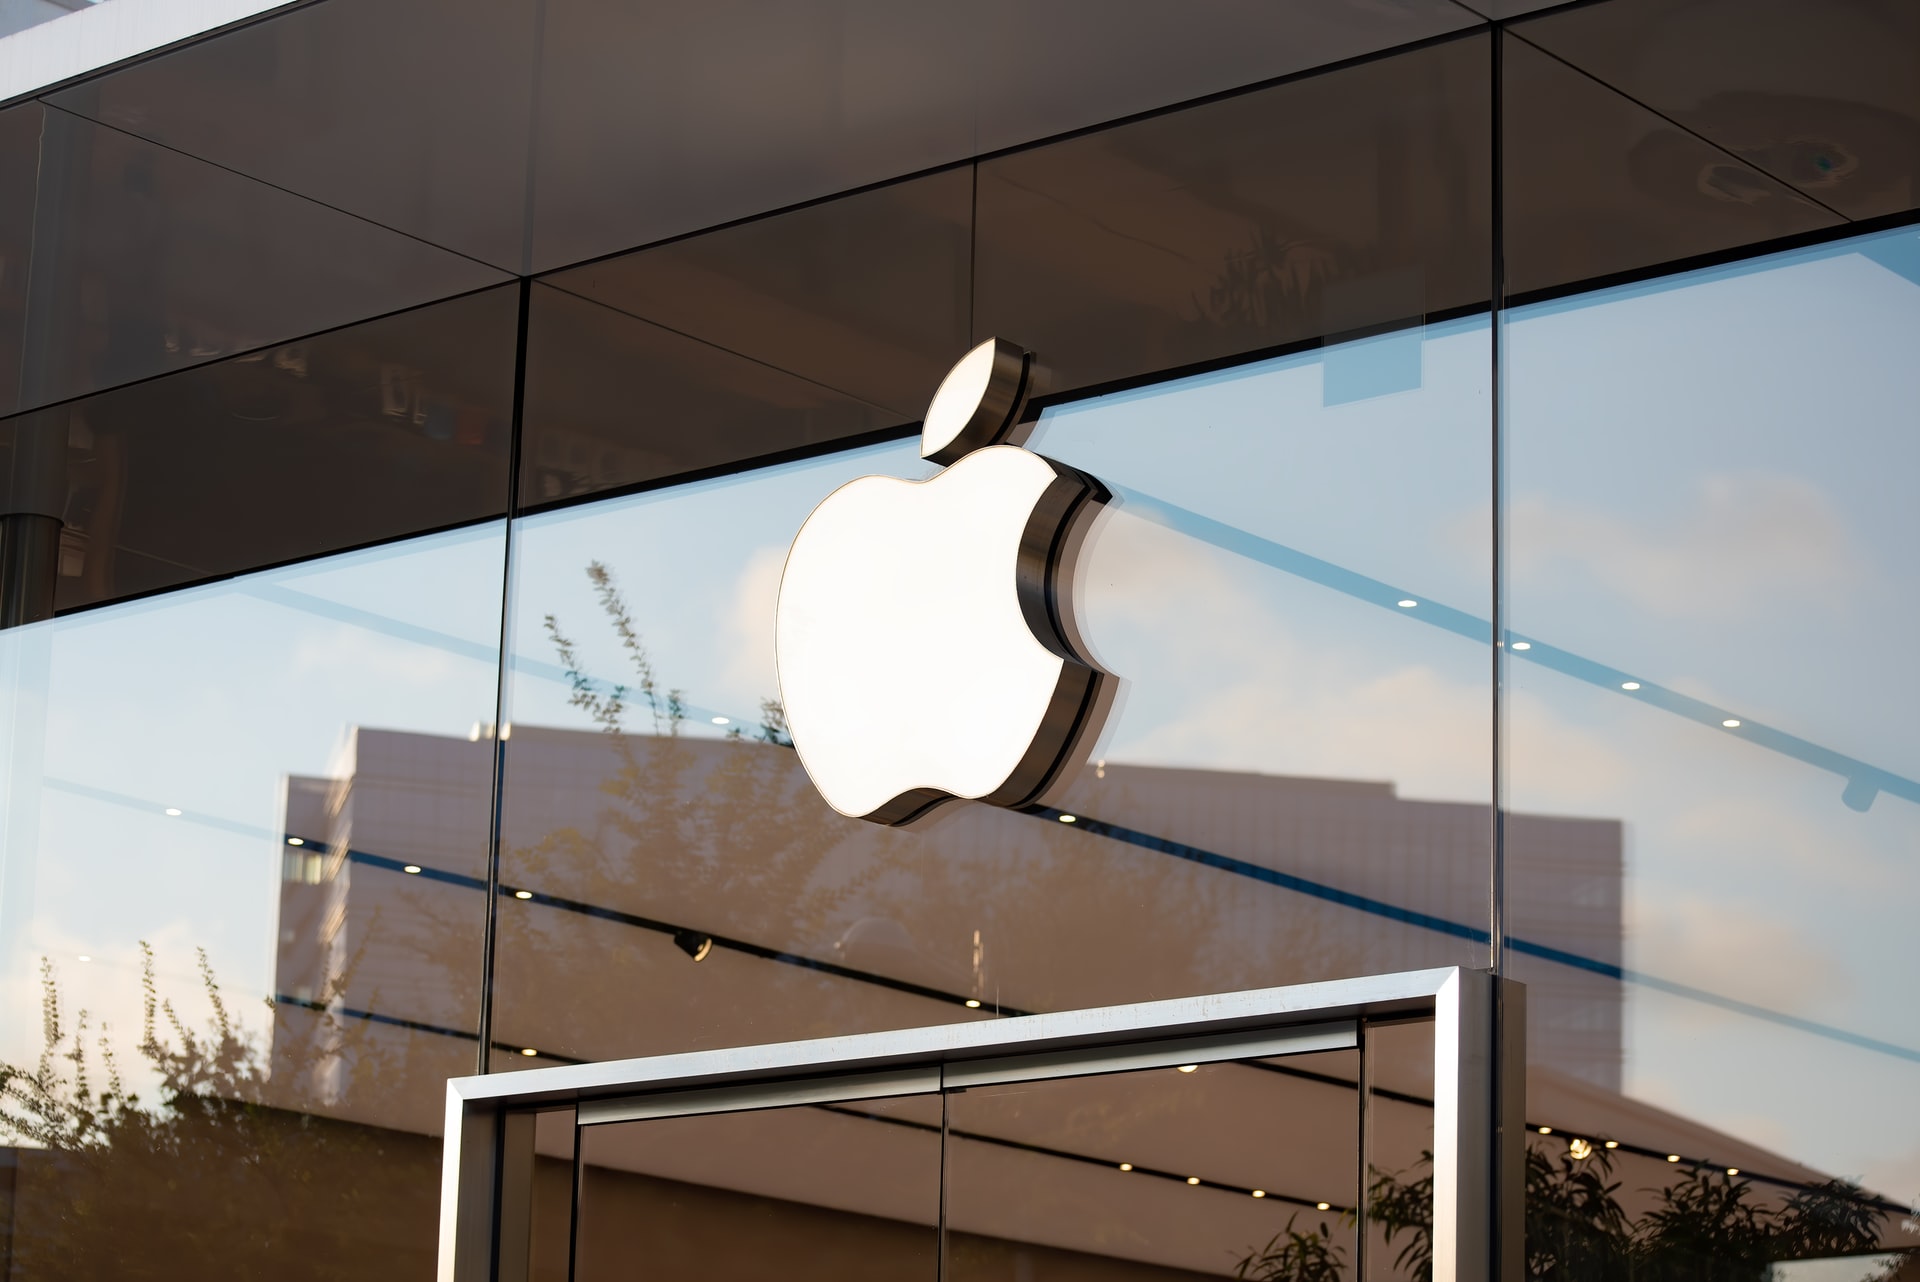 Apple Aims To Be Carbon Neutral By 2030: An Ambitious Environmental Commitment